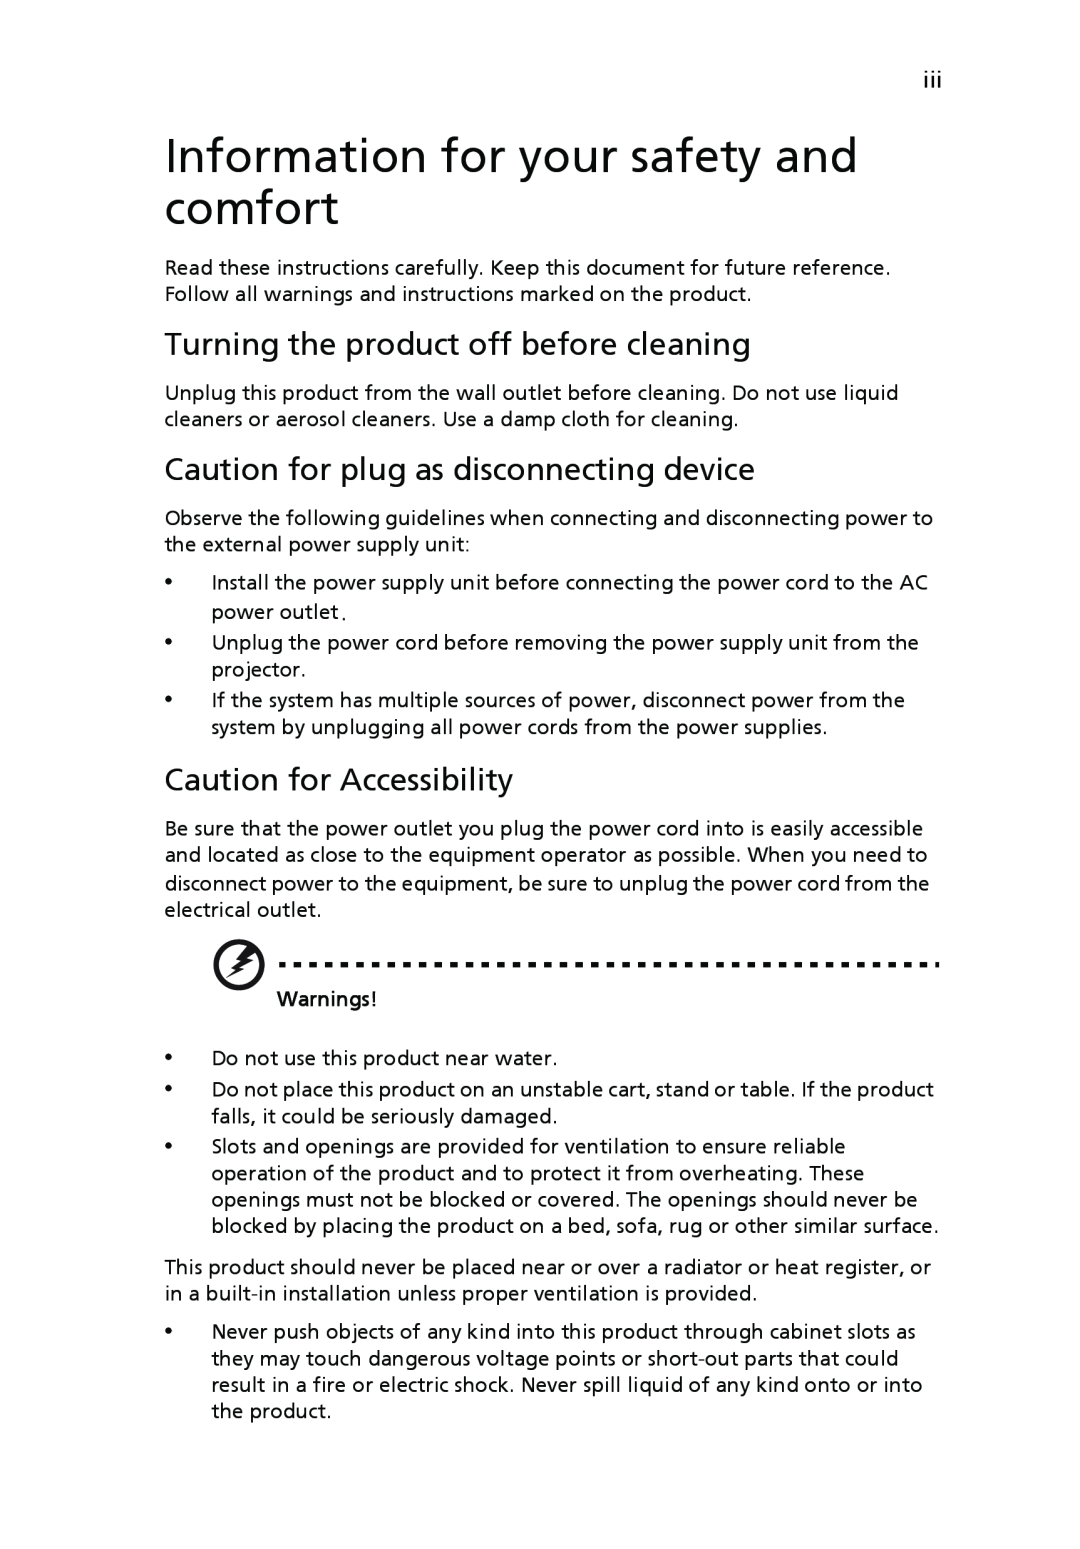 Acer H5350 Information for your safety and comfort, Turning the product off before cleaning, Caution for Accessibility 